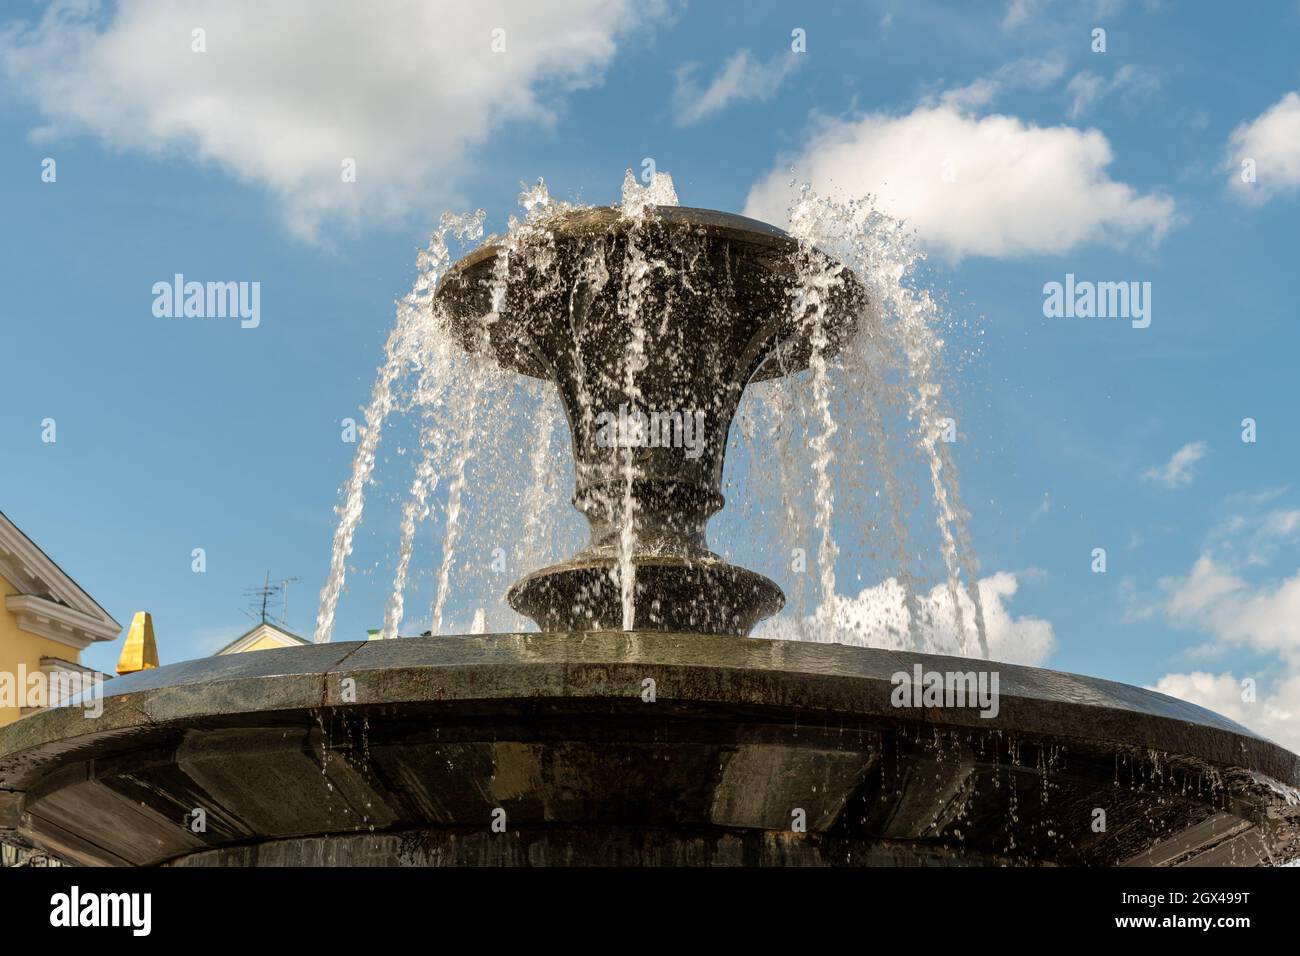 Water pours from a bowl of black marble fountain against a blue sky with small clouds. Stock Photo